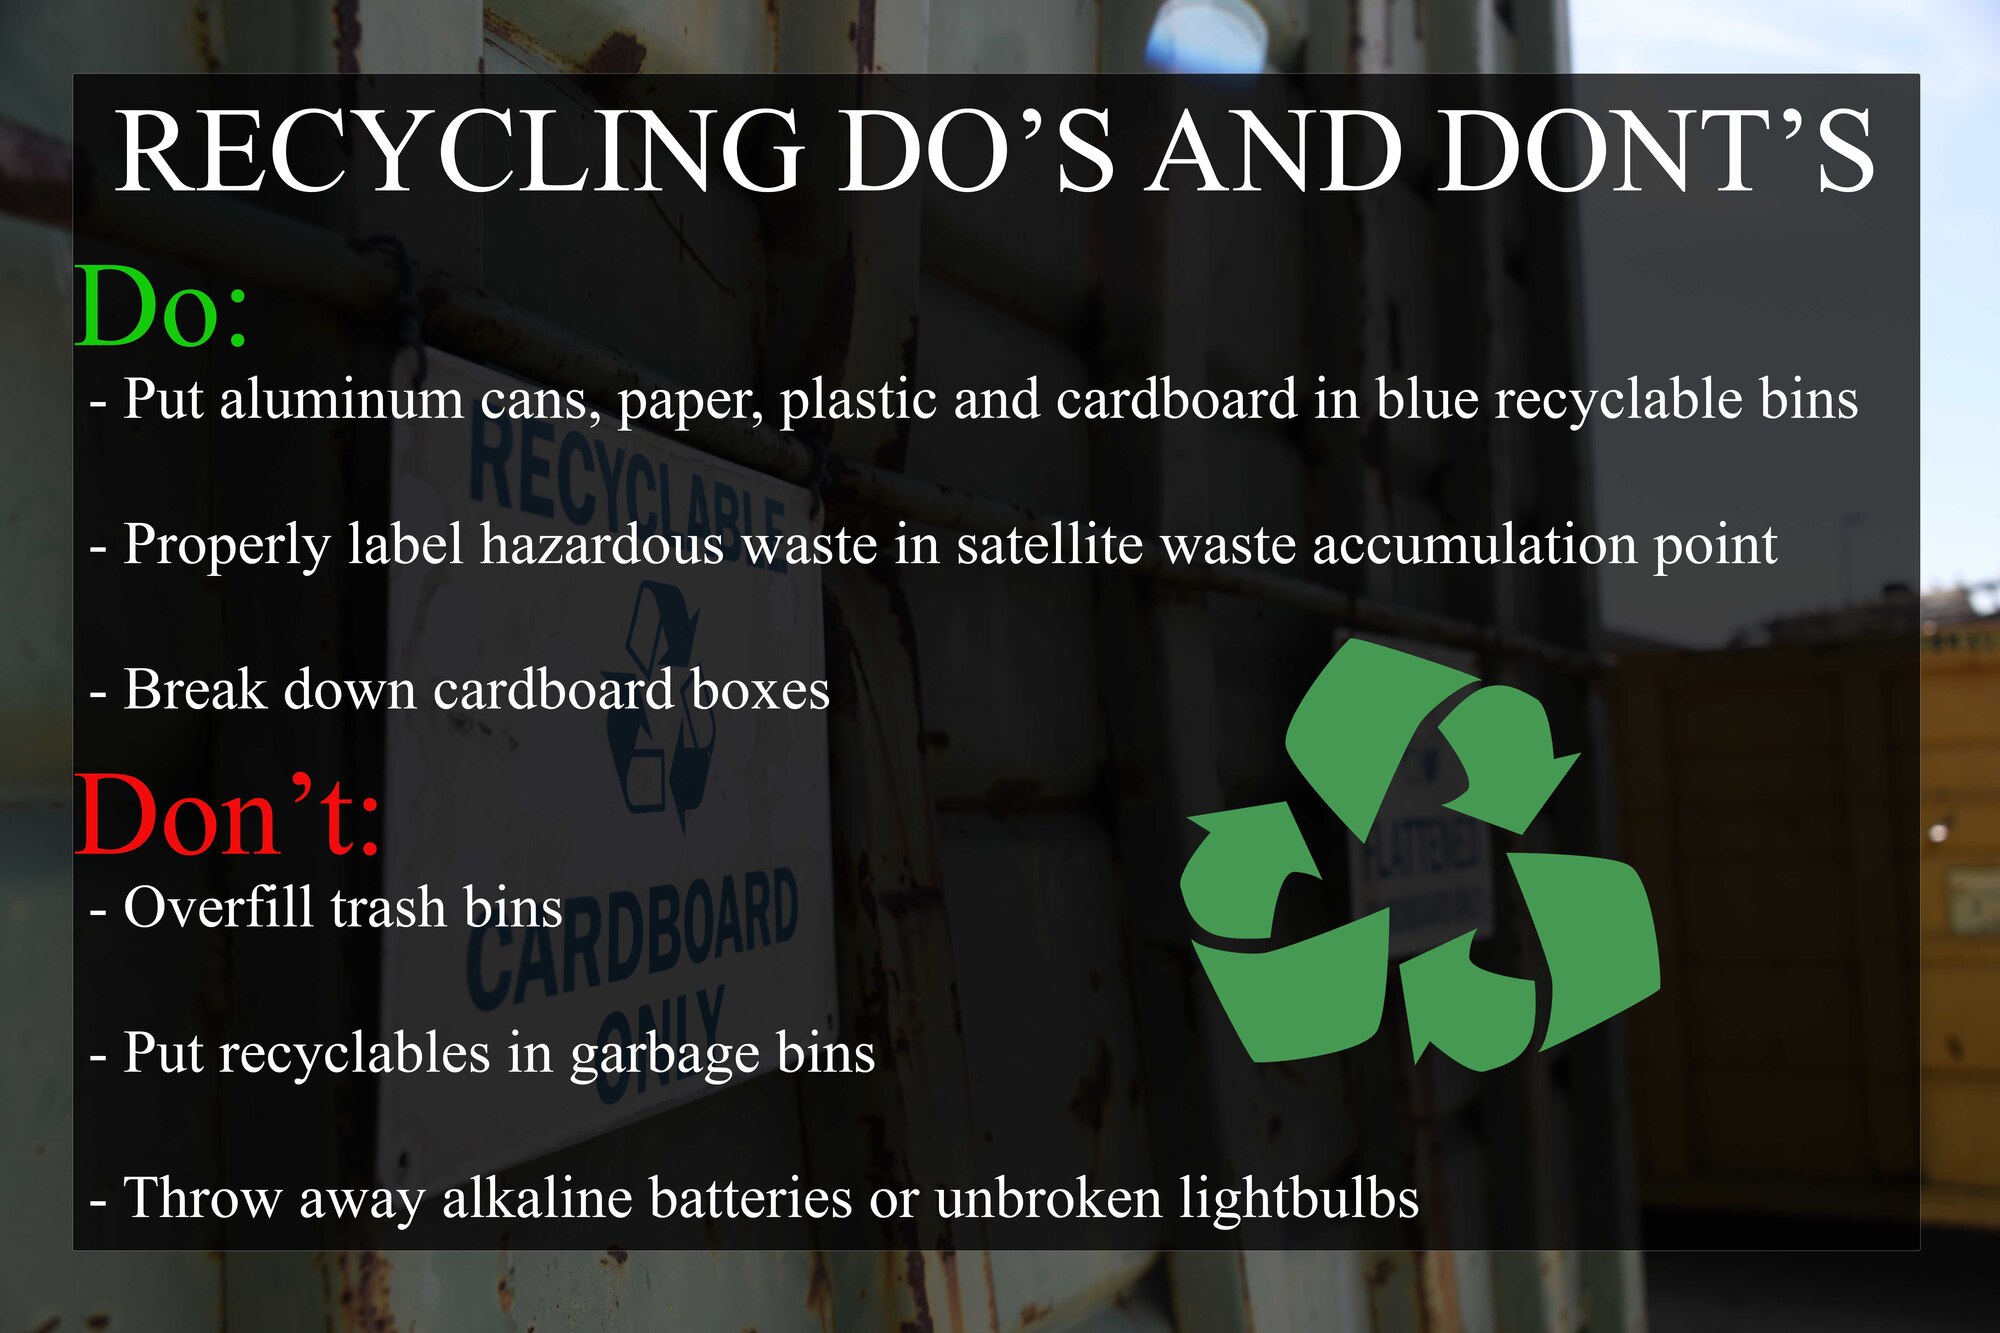 Graphic of a black box in front of a photo of a recycle bin stating: Recycling Do's and Don'ts. Do: Put aluminum cans, paper, plastic and cardboard in blue recyclable bins, properly label hazardous waste in satellite waste accumulation point, and break down cardboard boxes. Don't: Overfill trash bins, put recyclables in garbage bins, throw away alkaline batteries or unbroken lightbulbs.